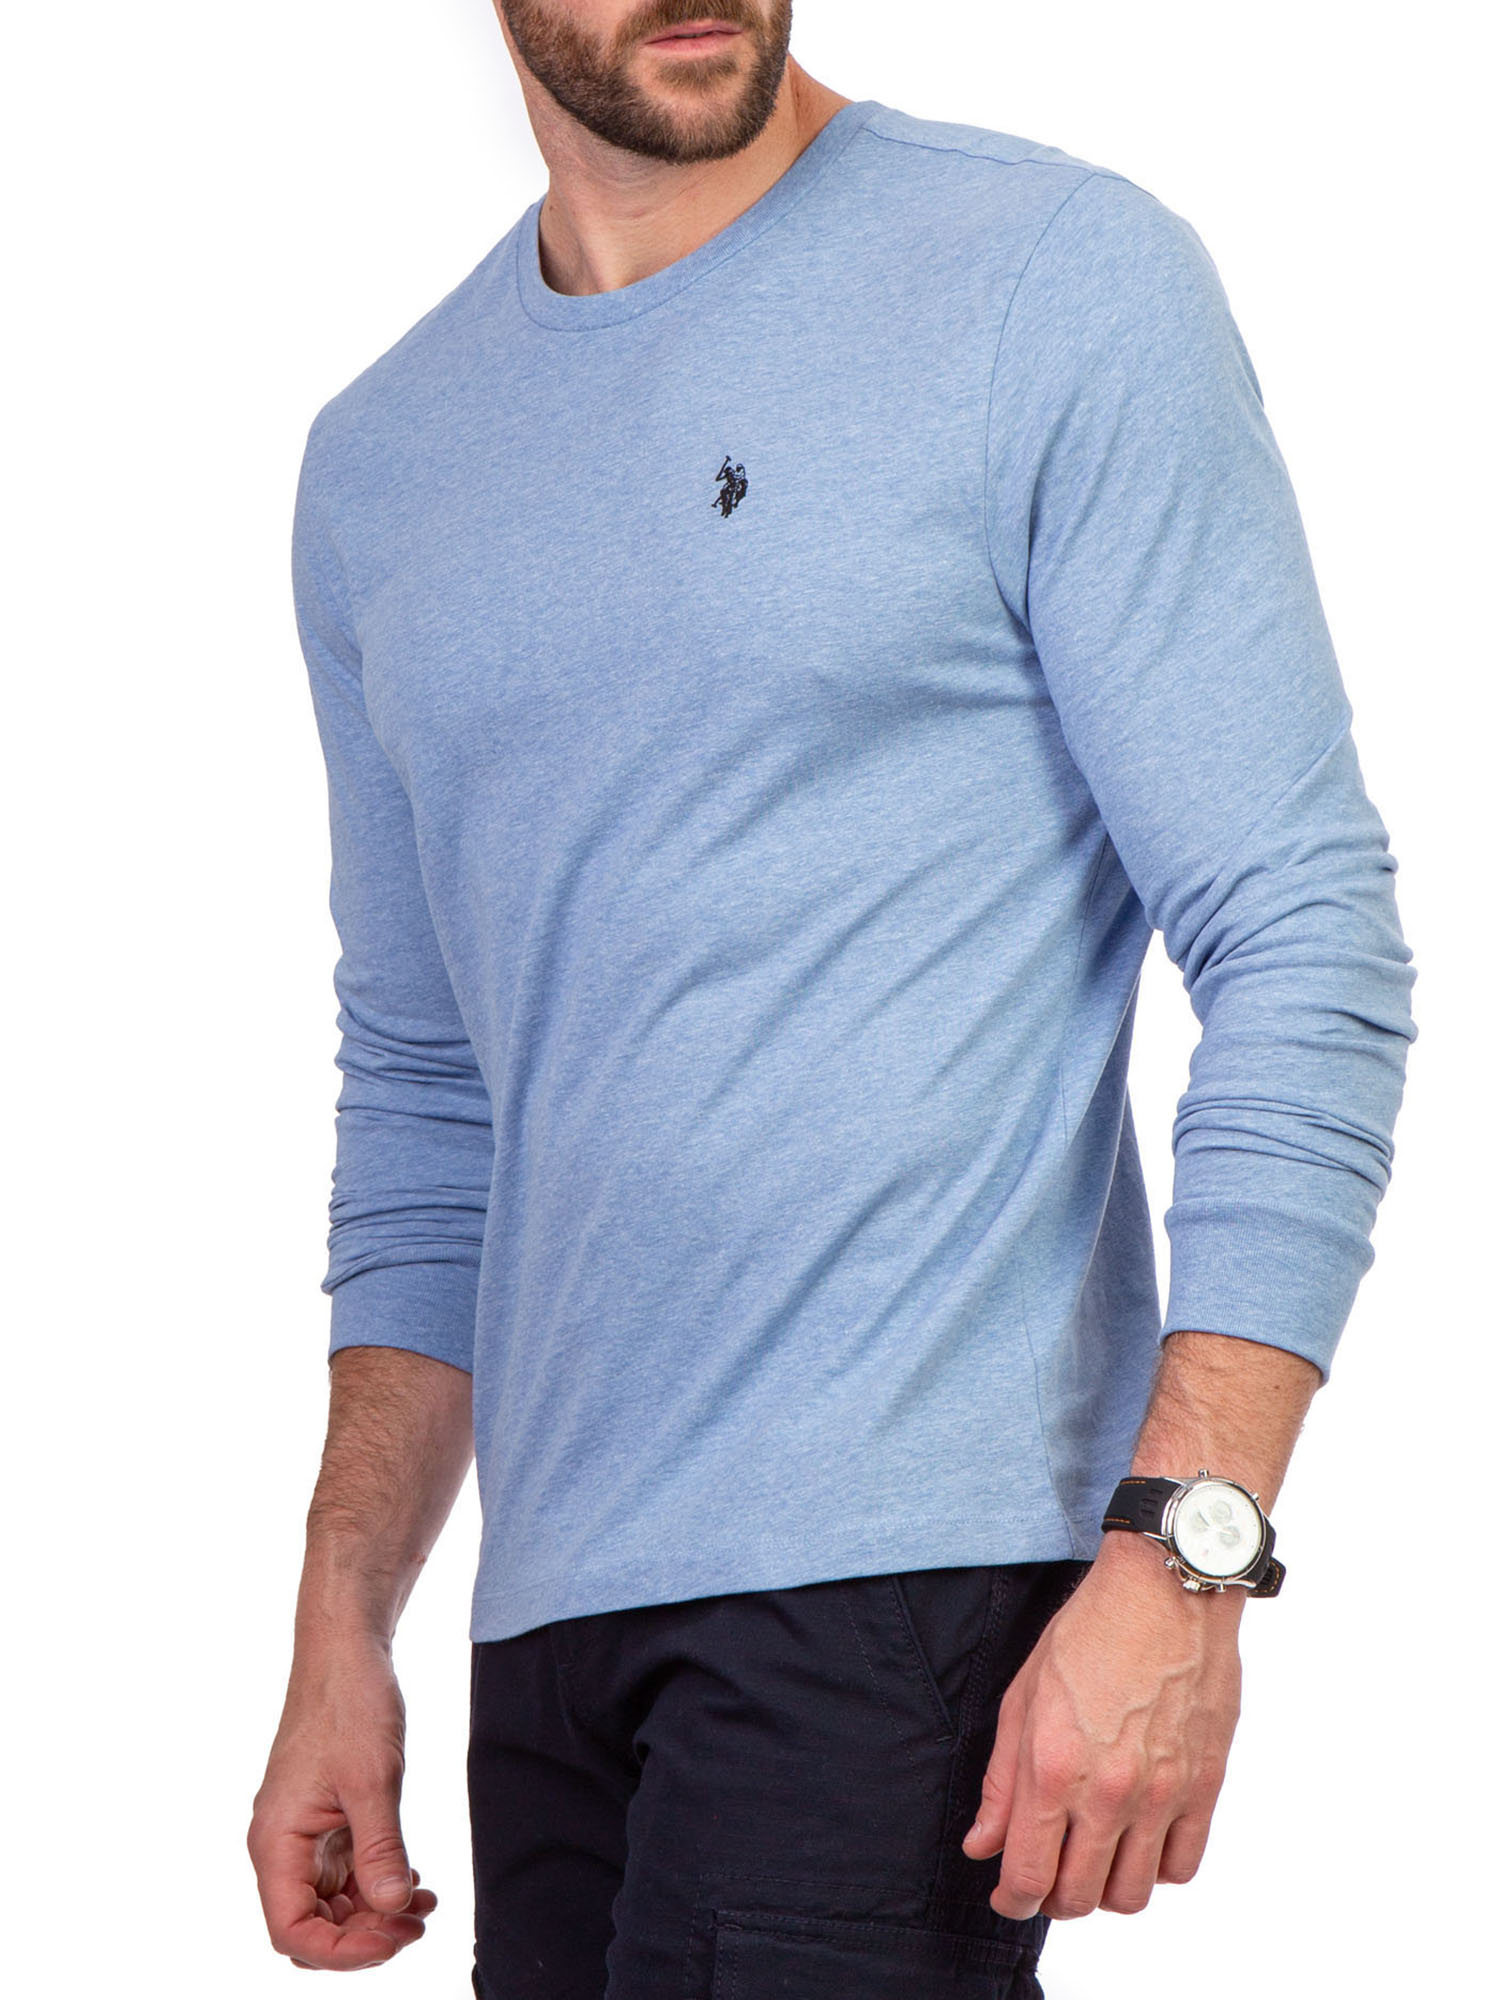 U.S. Polo Assn. Men's Long Sleeve Solid T-Shirt - image 5 of 5